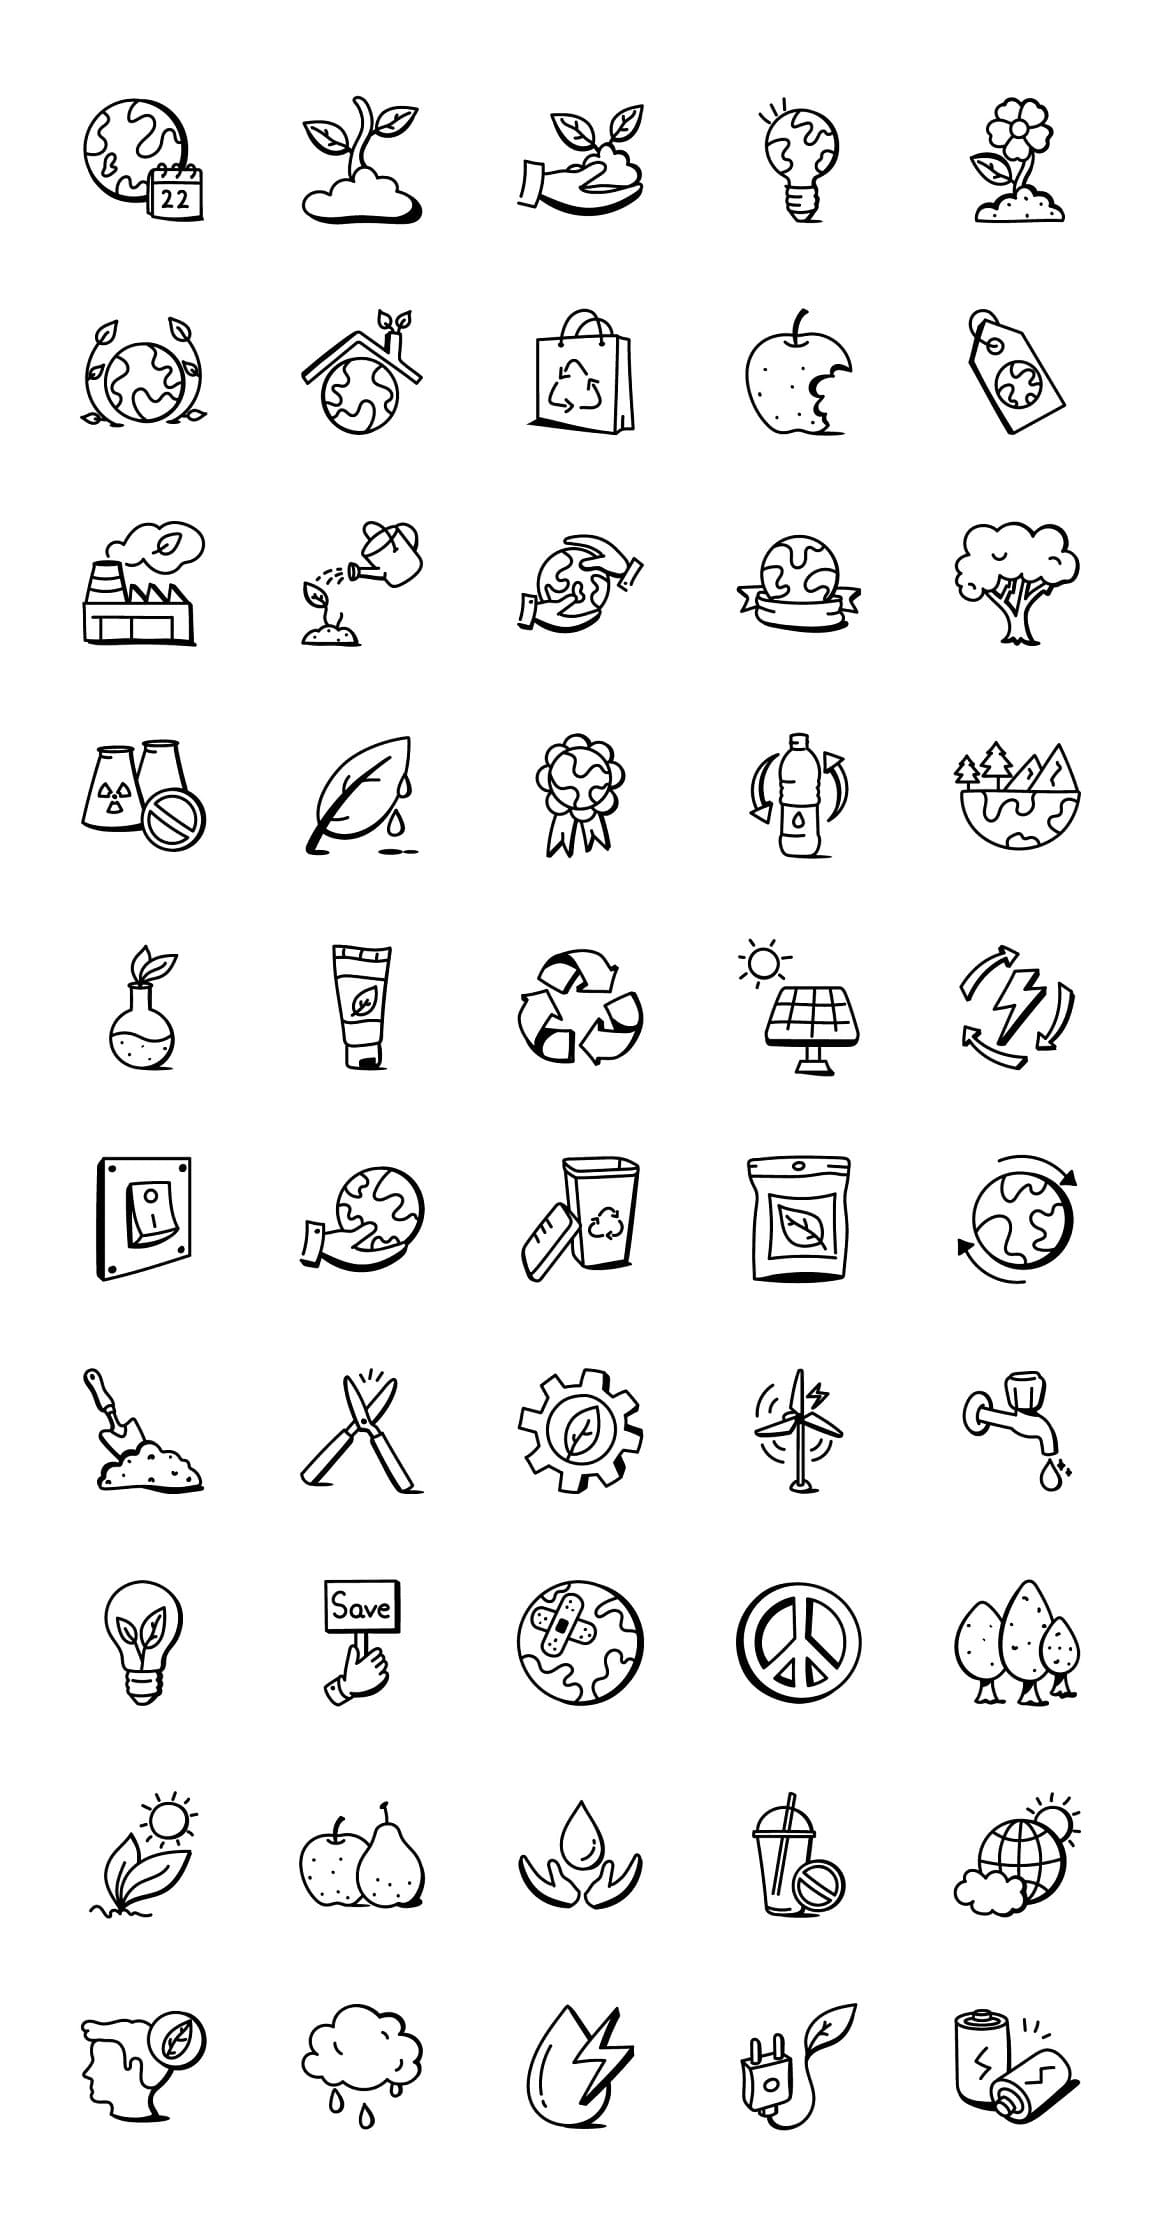 Black icons depicting care for the environment on a white background.